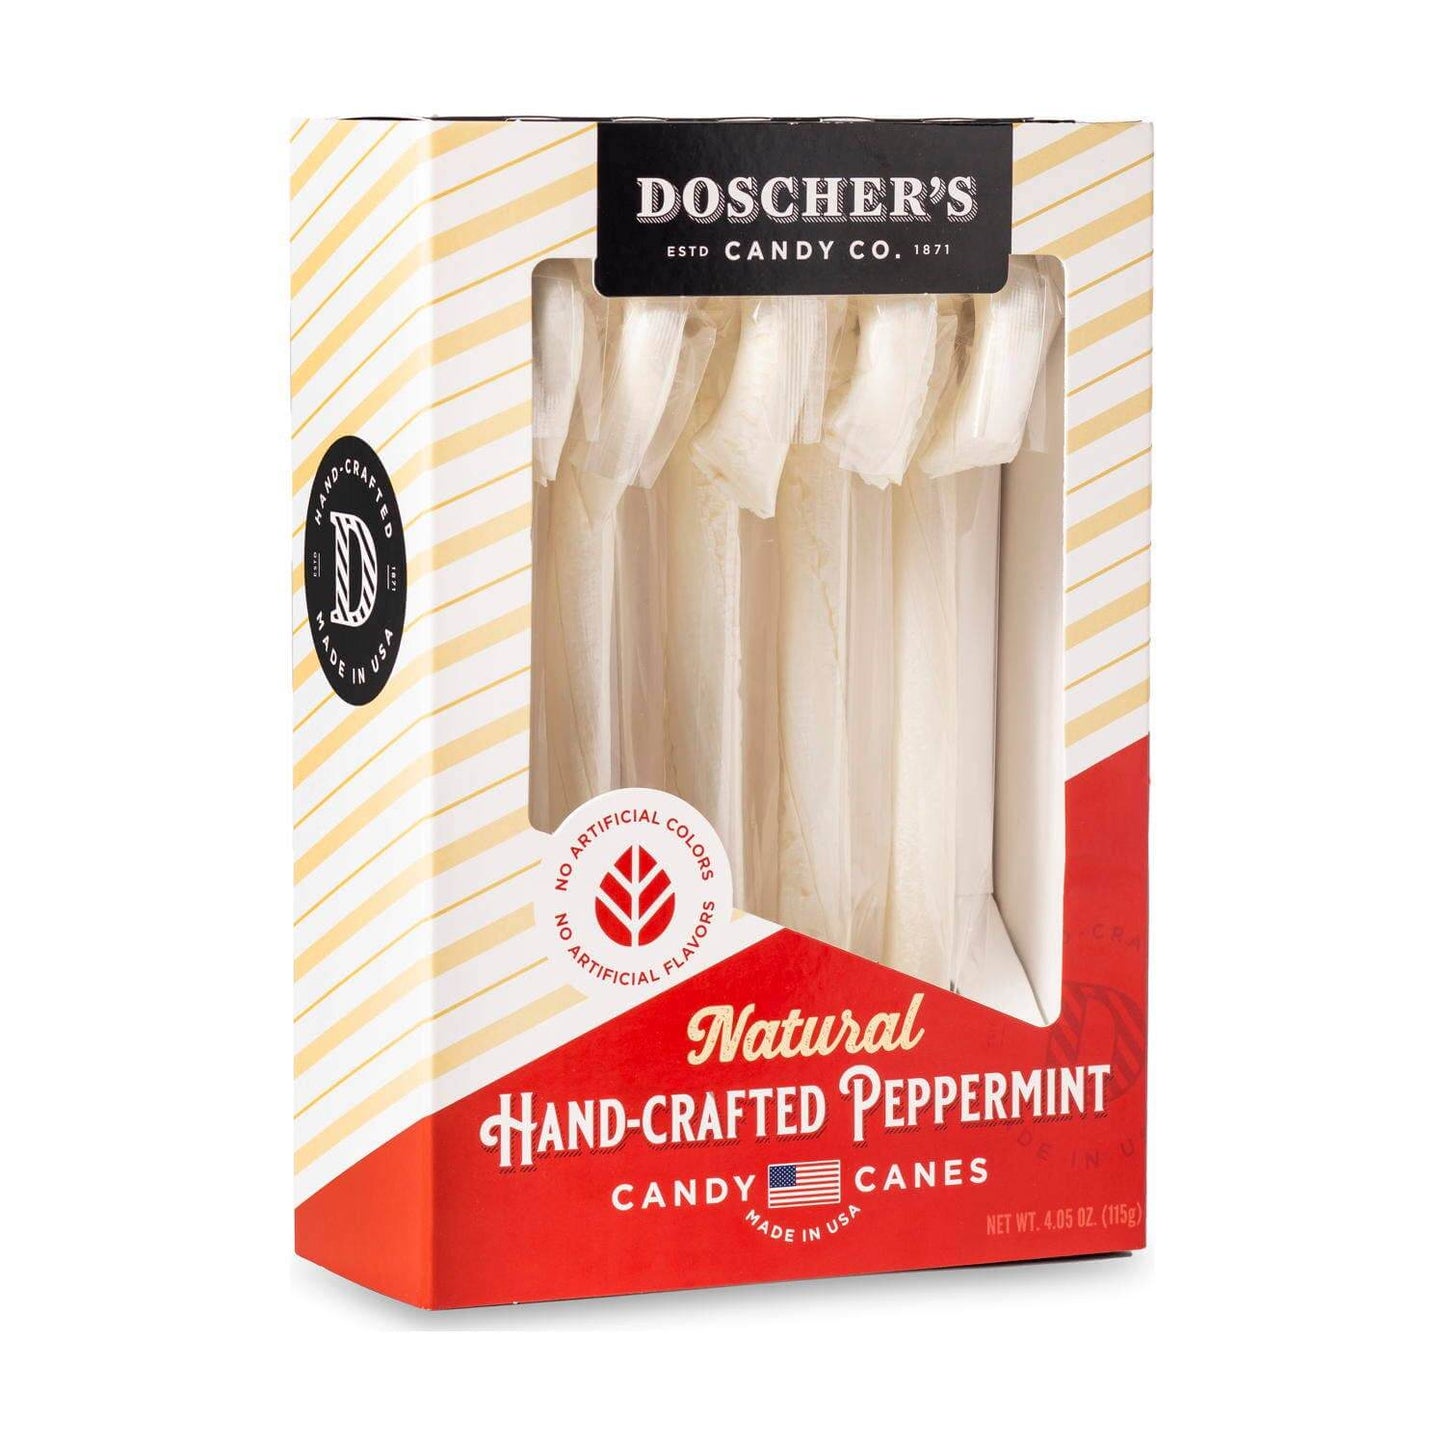 Doscher's Handcrafted All-White Peppermint Candy Cane